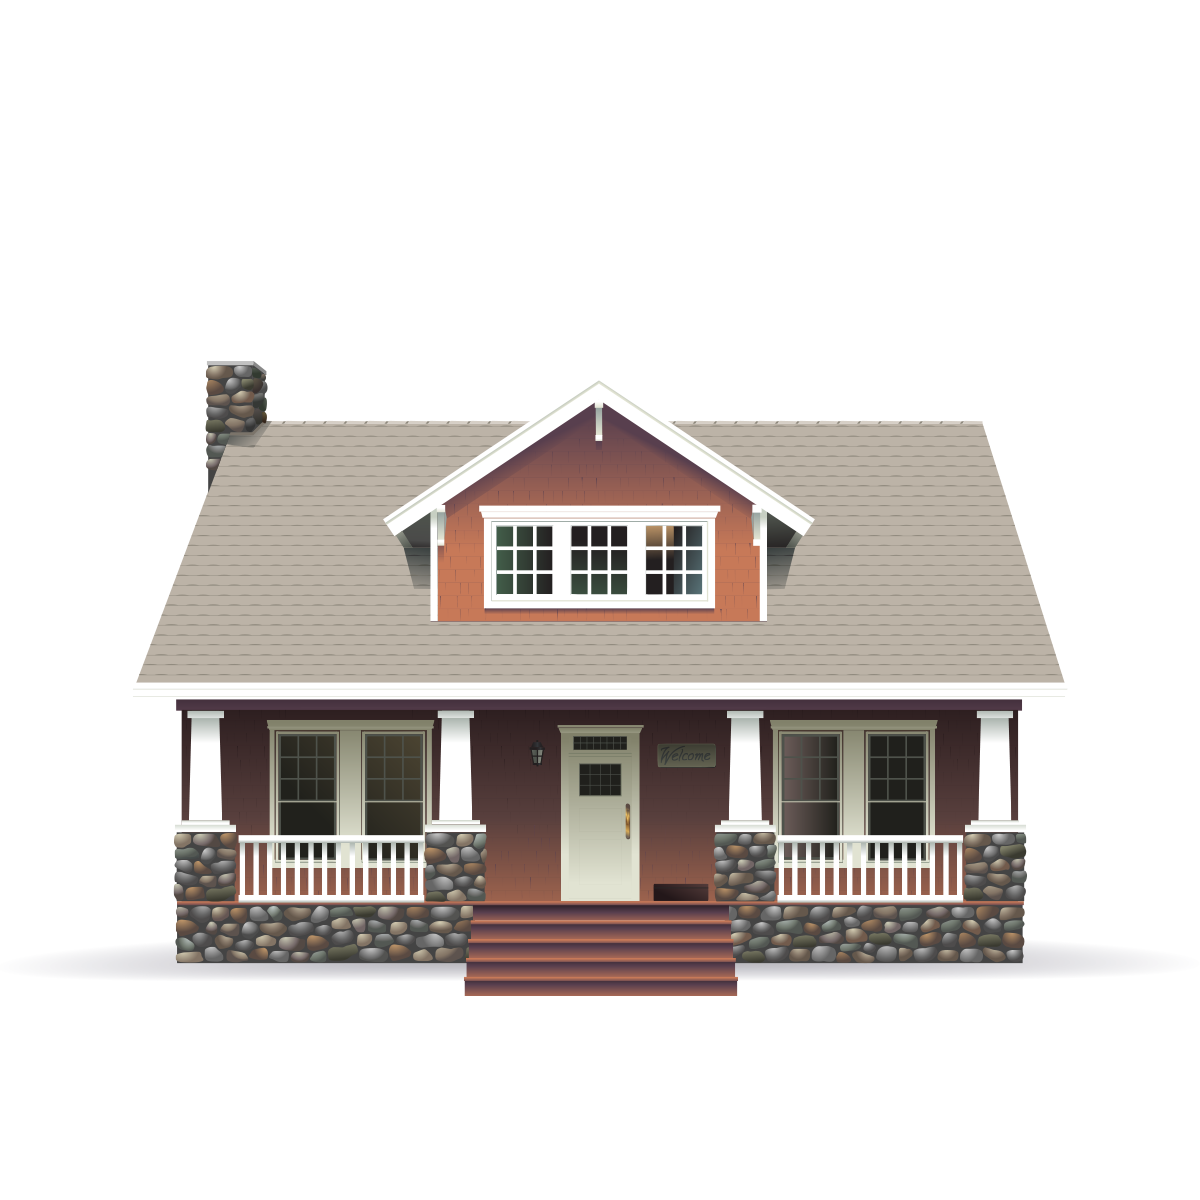 Brown bungalow house with beige roof and stone porch illustration